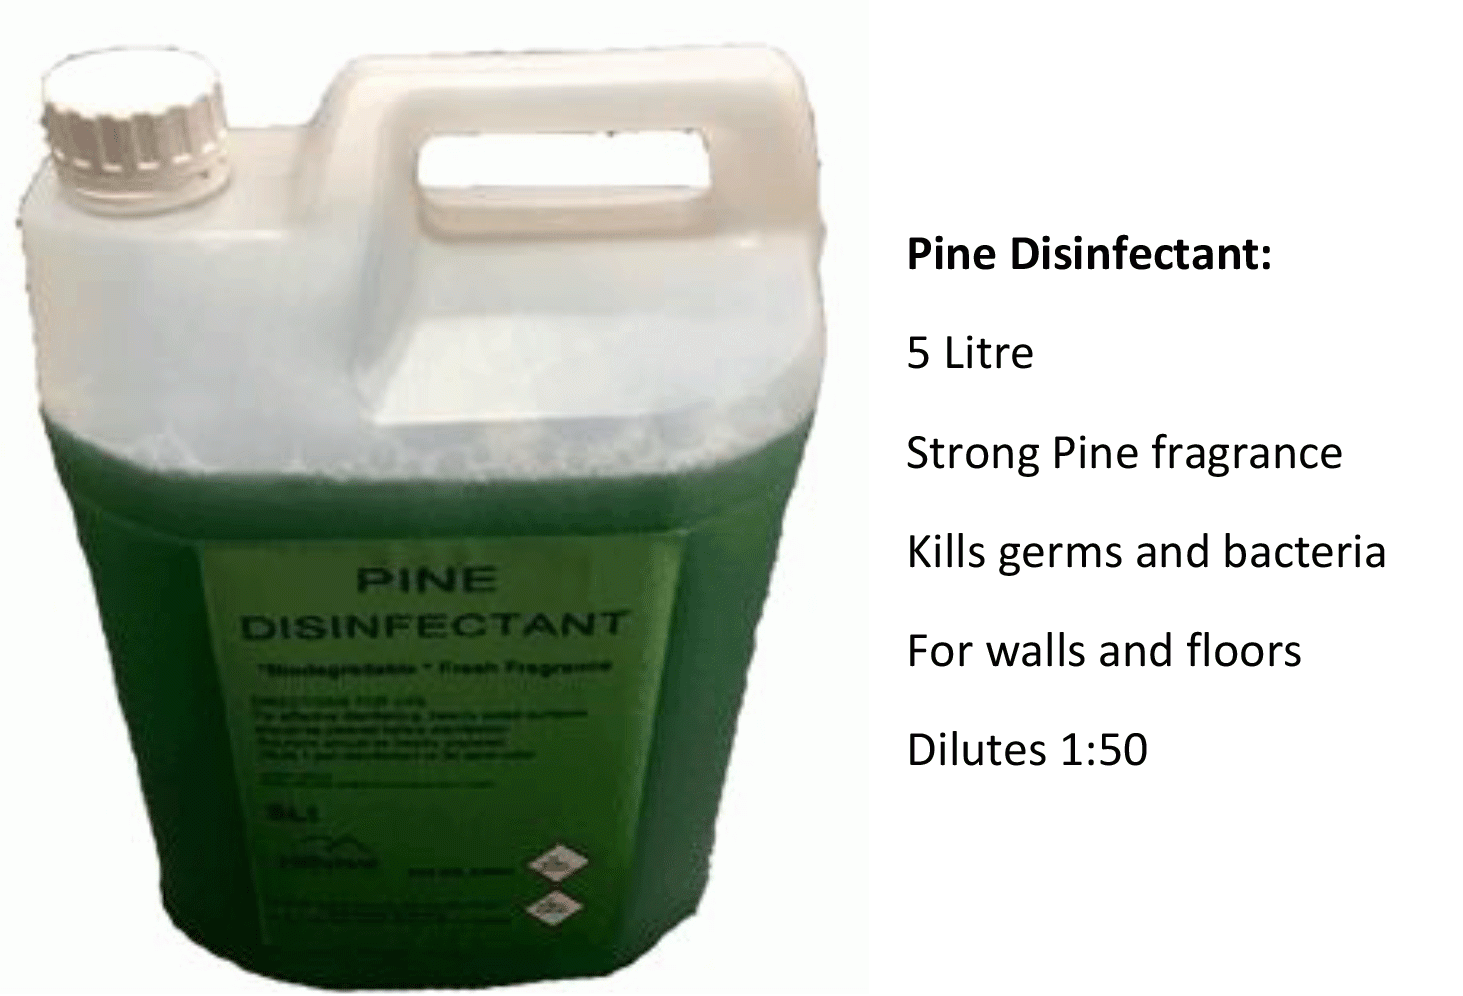 Pine-Disinfectant-info.gif#asset:9199